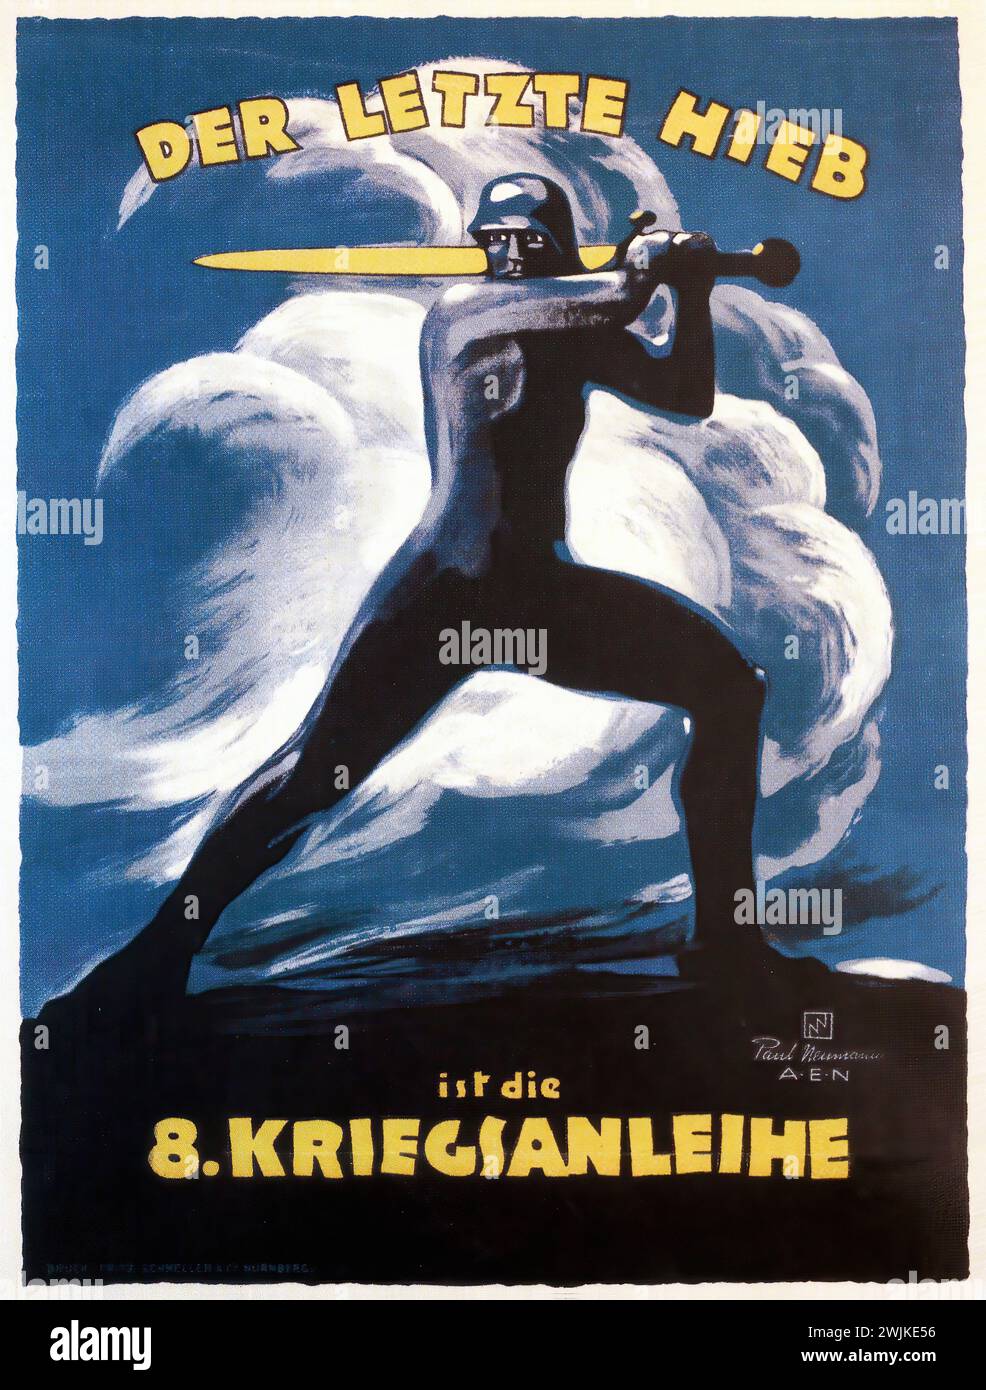 'Der letzte Hieb ist die 8. Kriegsanleihe' ['The final blow is the eighth war loan'] Vintage German Advertising featuring a soldier with a glaive, symbolic of the wartime effort to finance the military, using a dynamic composition with strong contrasts Stock Photo